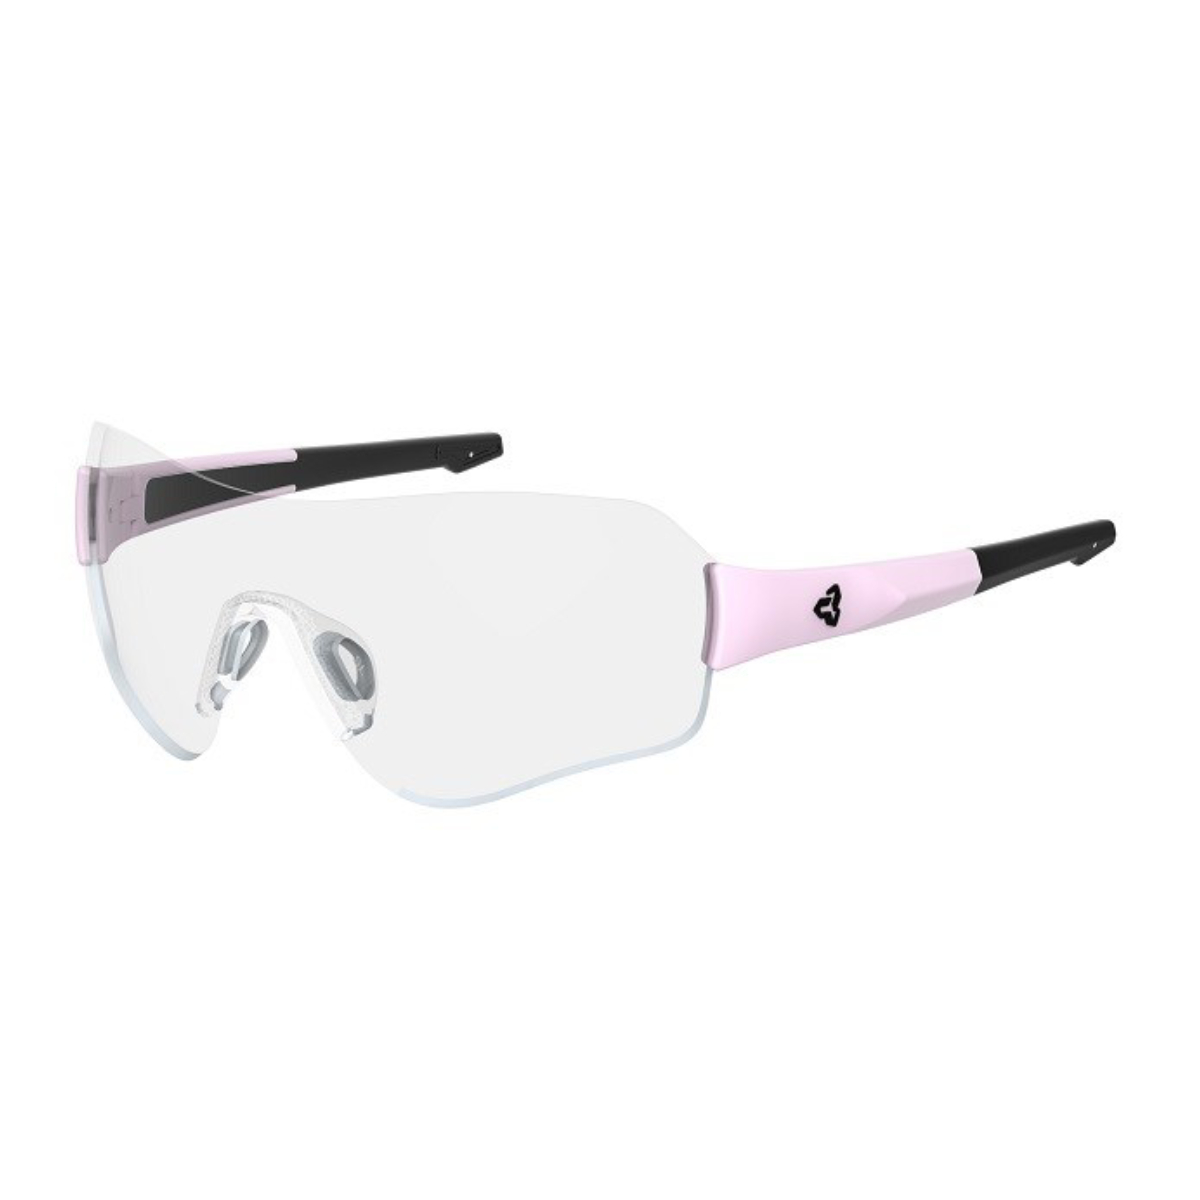 LUNETTE RYDERS FITZ POLY ROSE METALIC LENTILLE CLAIR ANTI BUEE